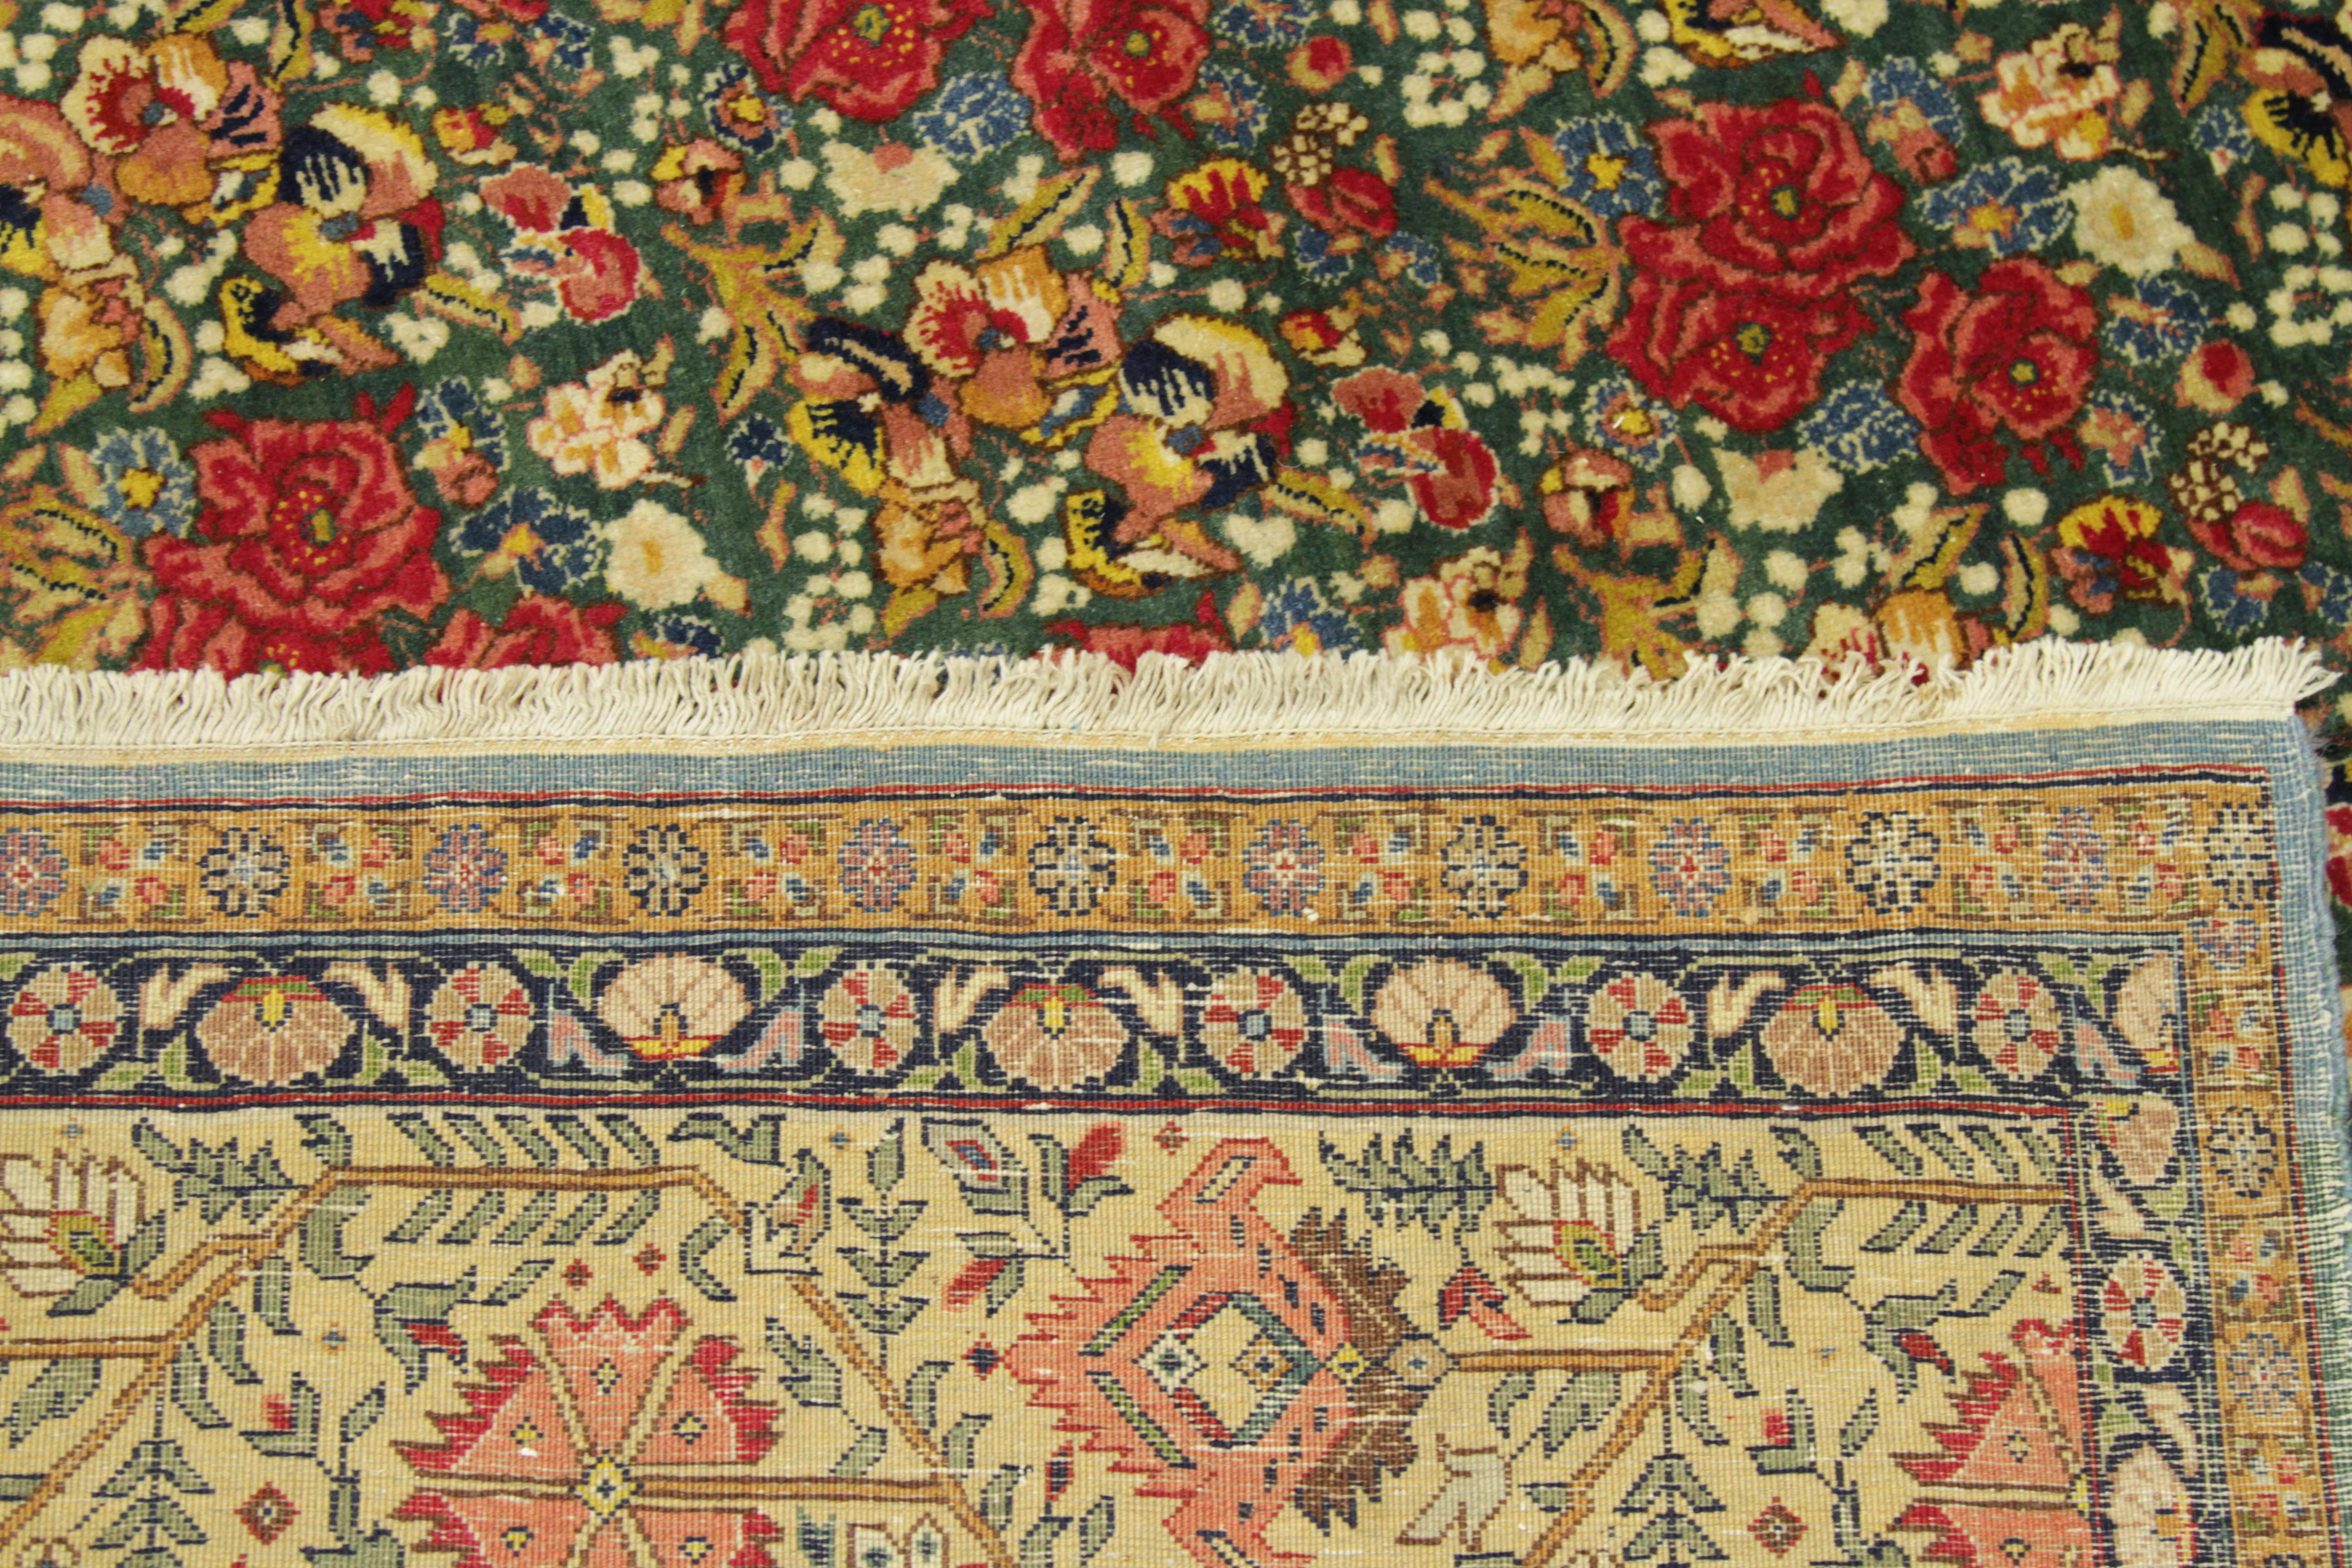 Wool 1950s Antique Persian Rug Tabriz Design with Gold and Red Field of Roses Pattern For Sale